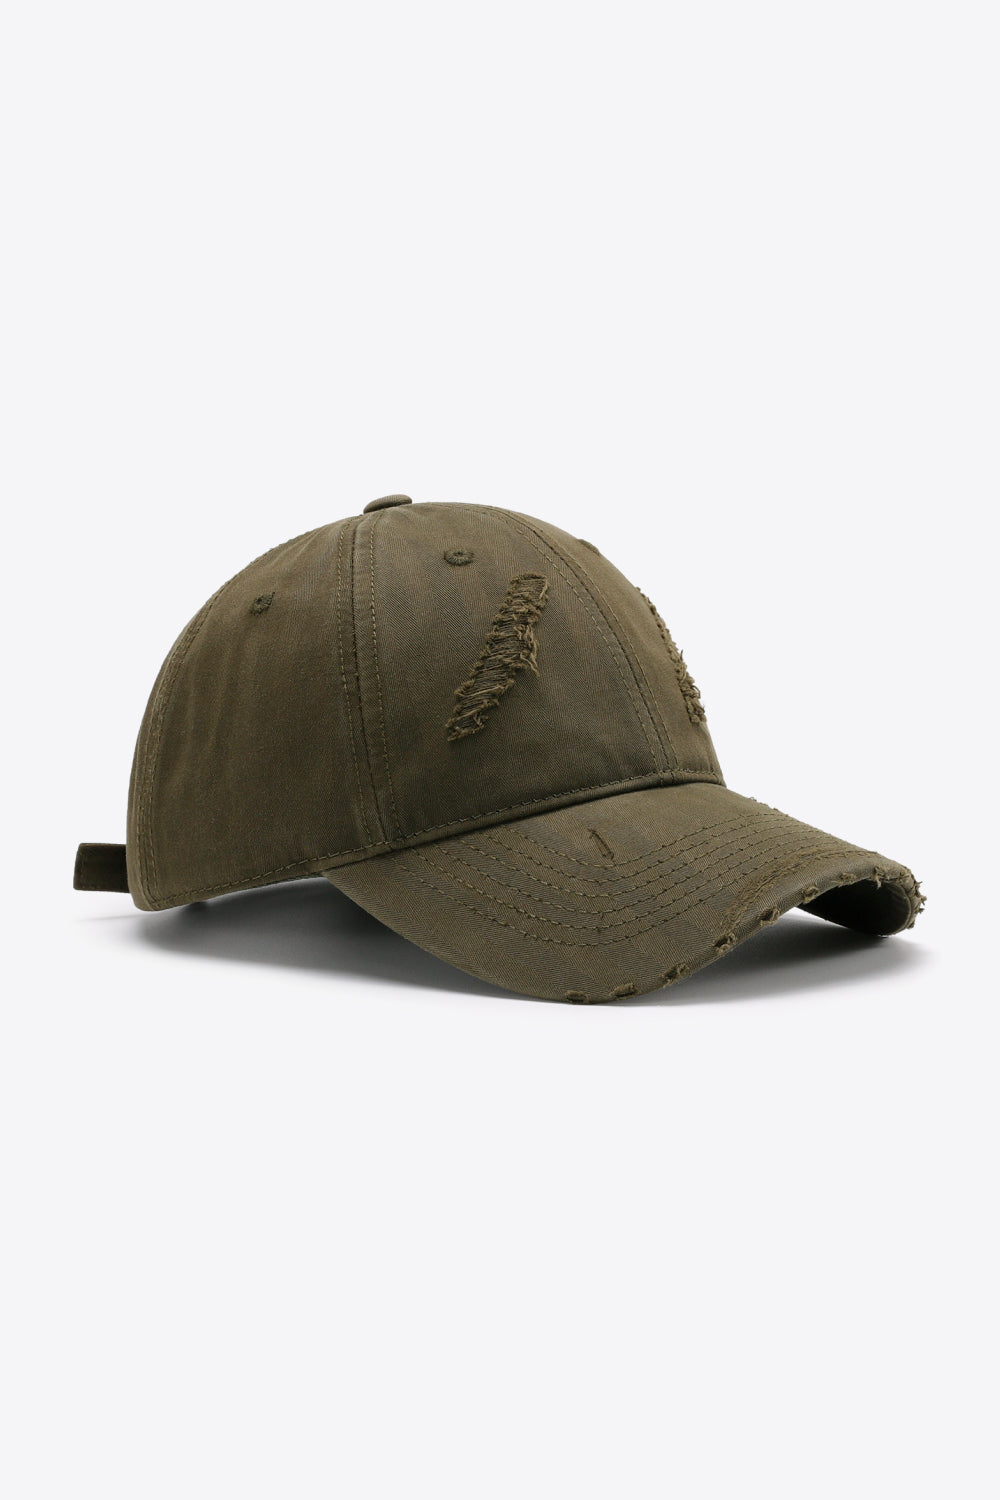 Distressed Adjustable Baseball Cap Army Green One Size